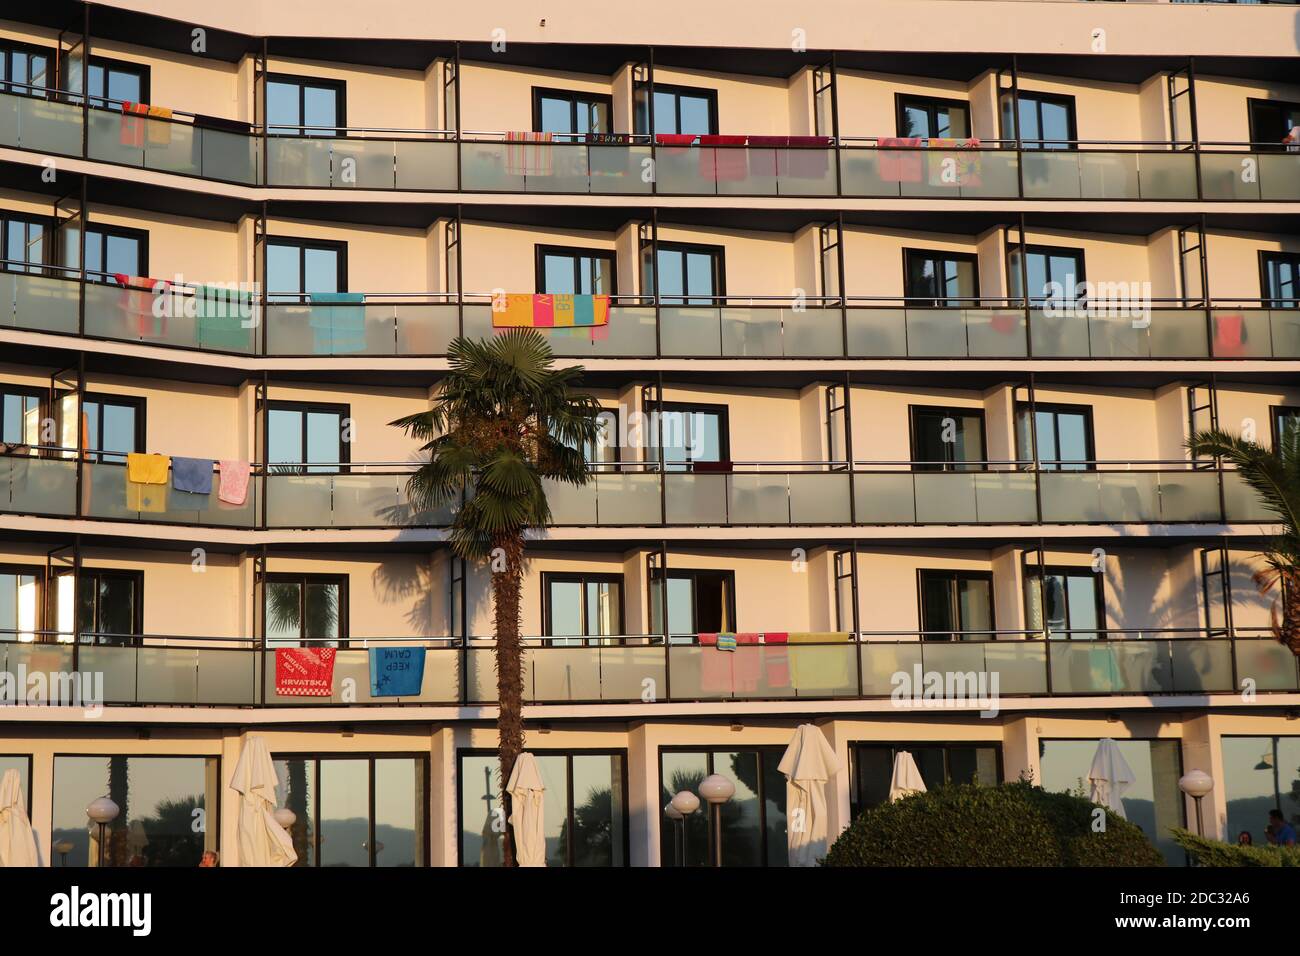 View of front of a buliding wall with multiple windows and balconies Stock Photo